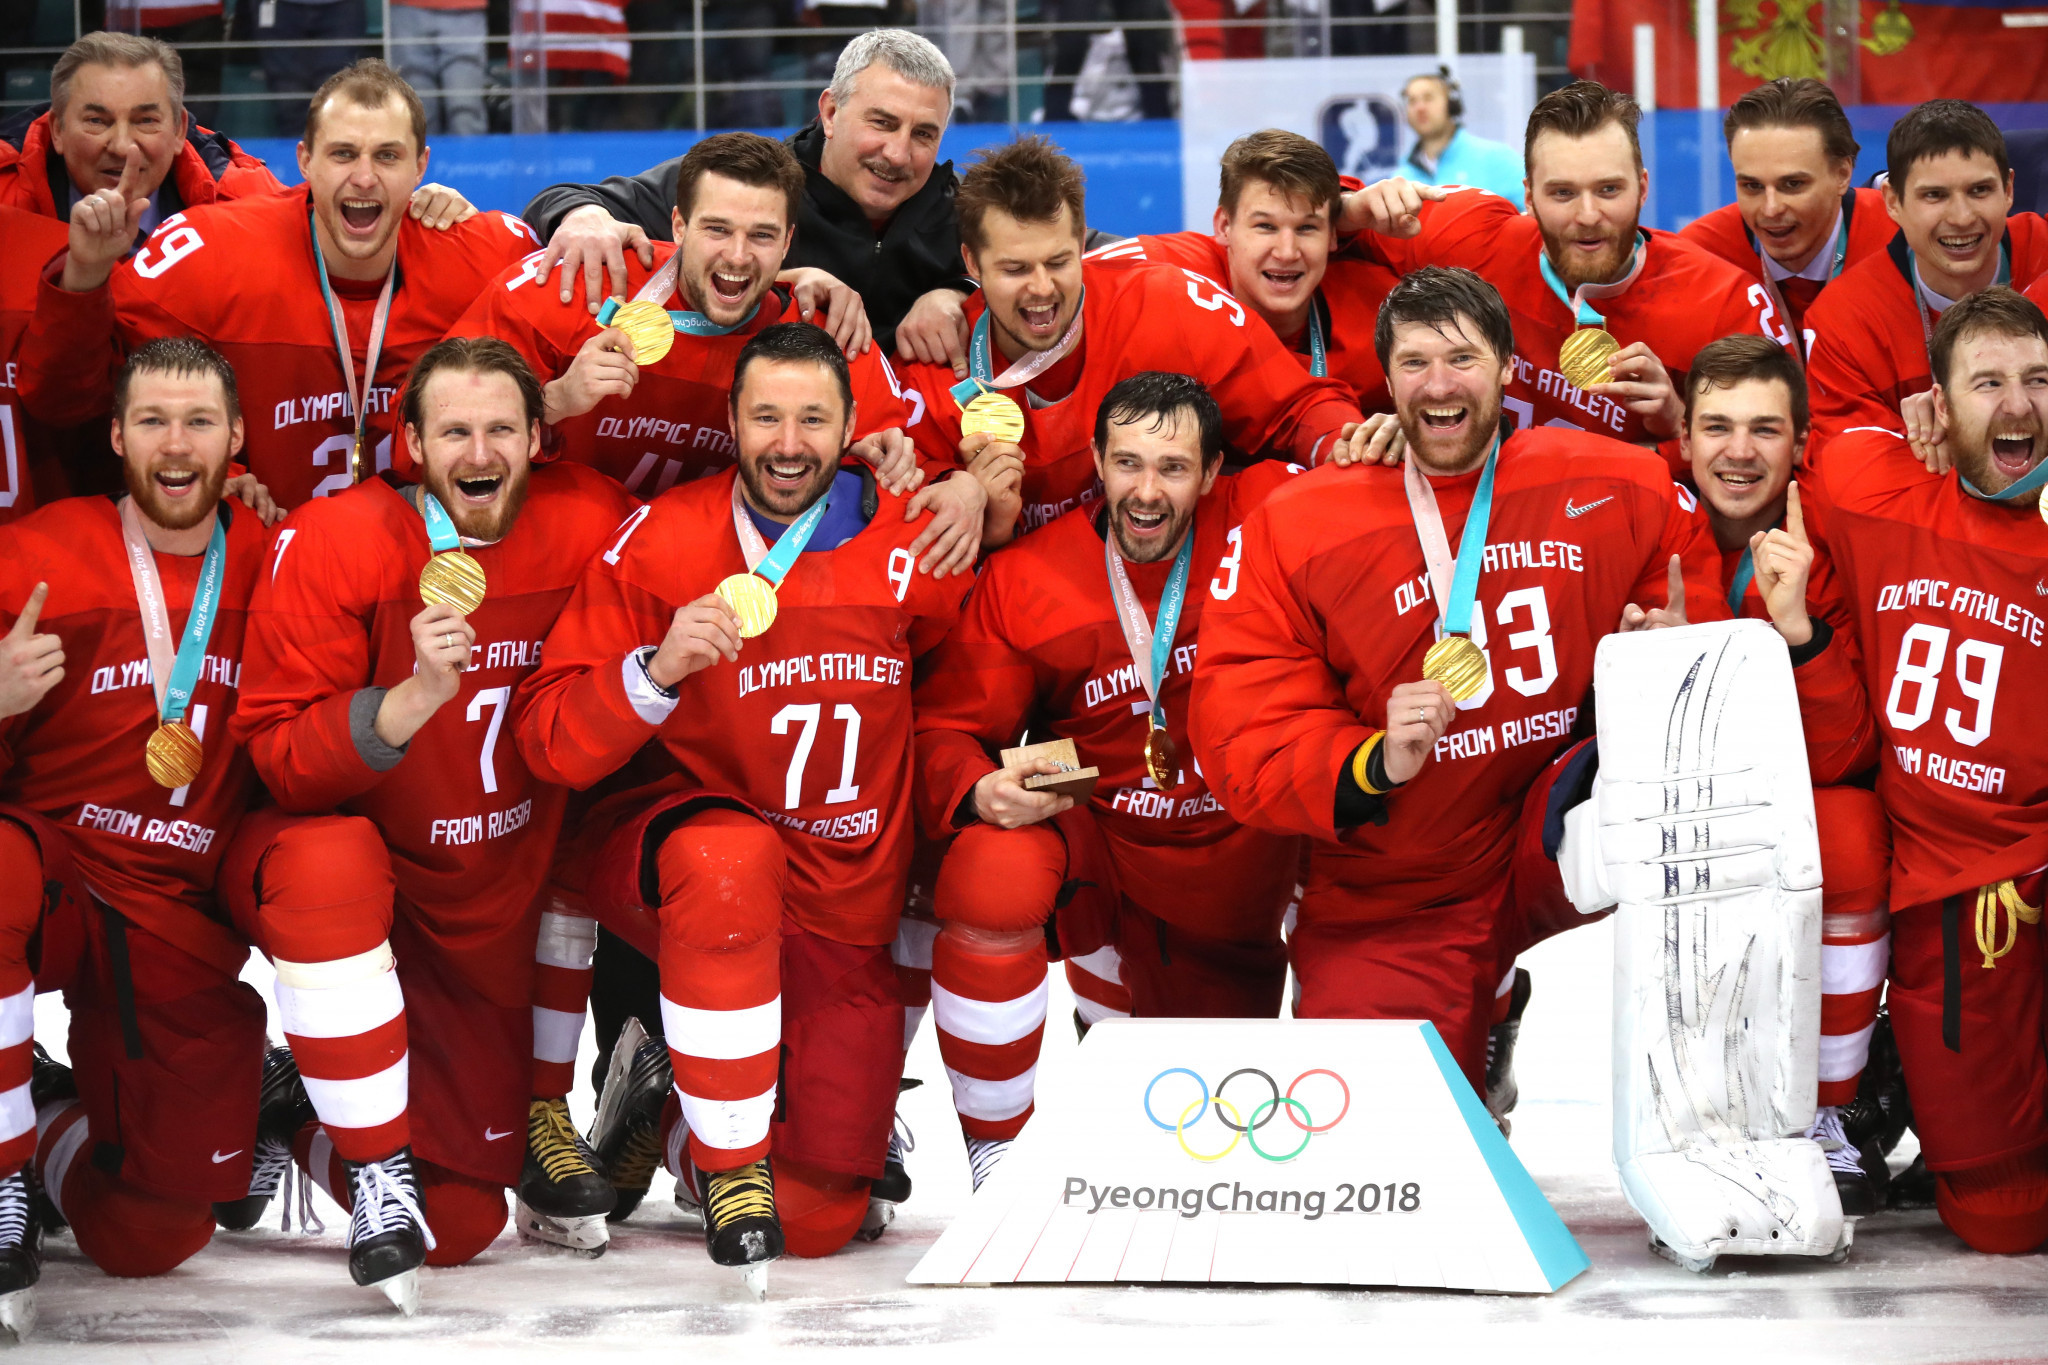 Russia earned Olympic gold in the men's ice hockey contest at Pyeongchang 2018 ©Getty Images